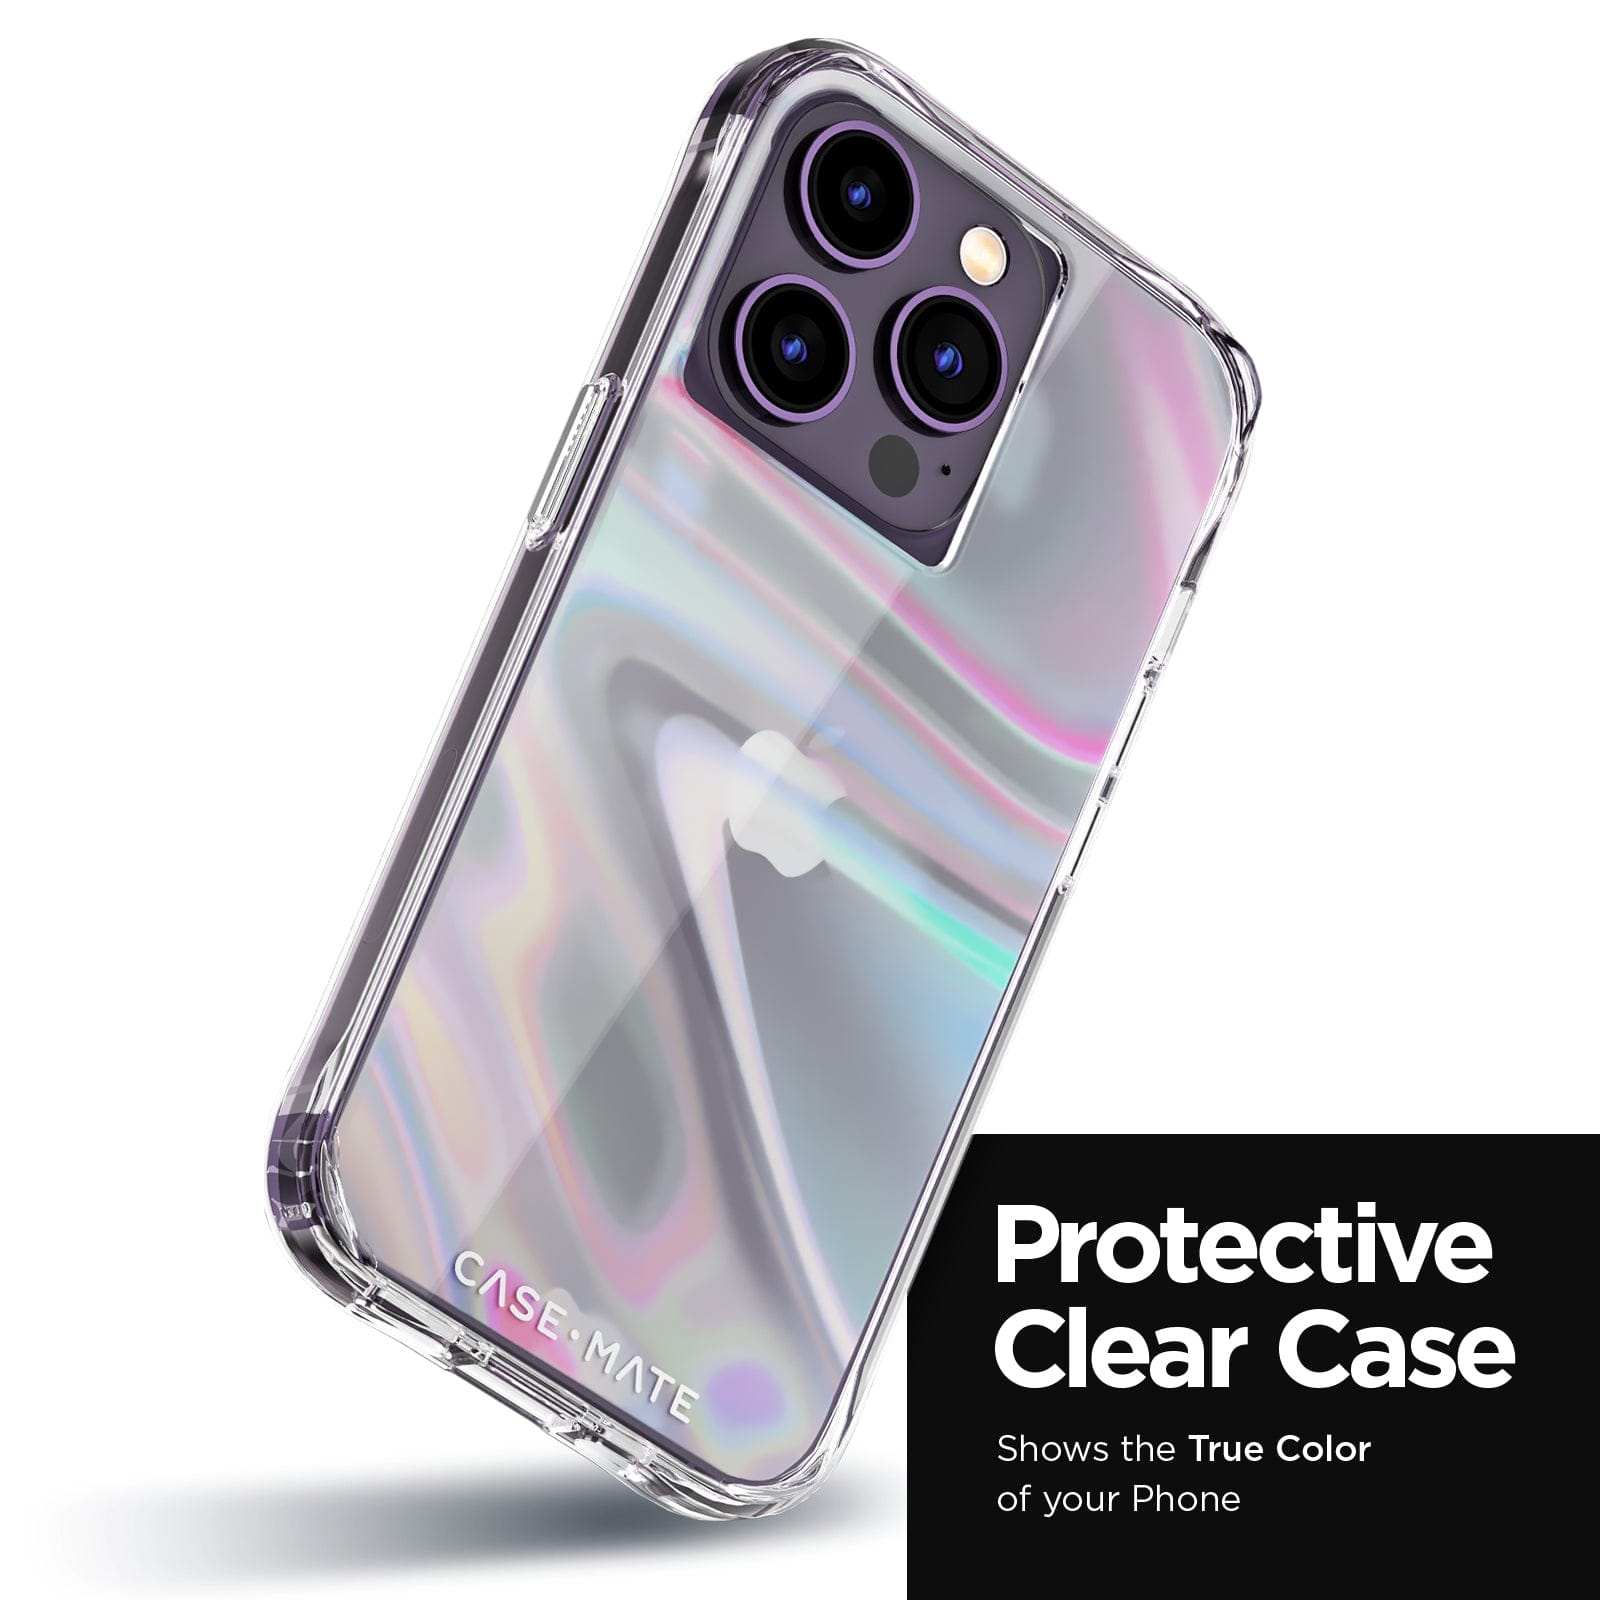 PROTECTIVE CLEAR CASE. SHOWS THE TRUE COLOR OF YOUR PHONE